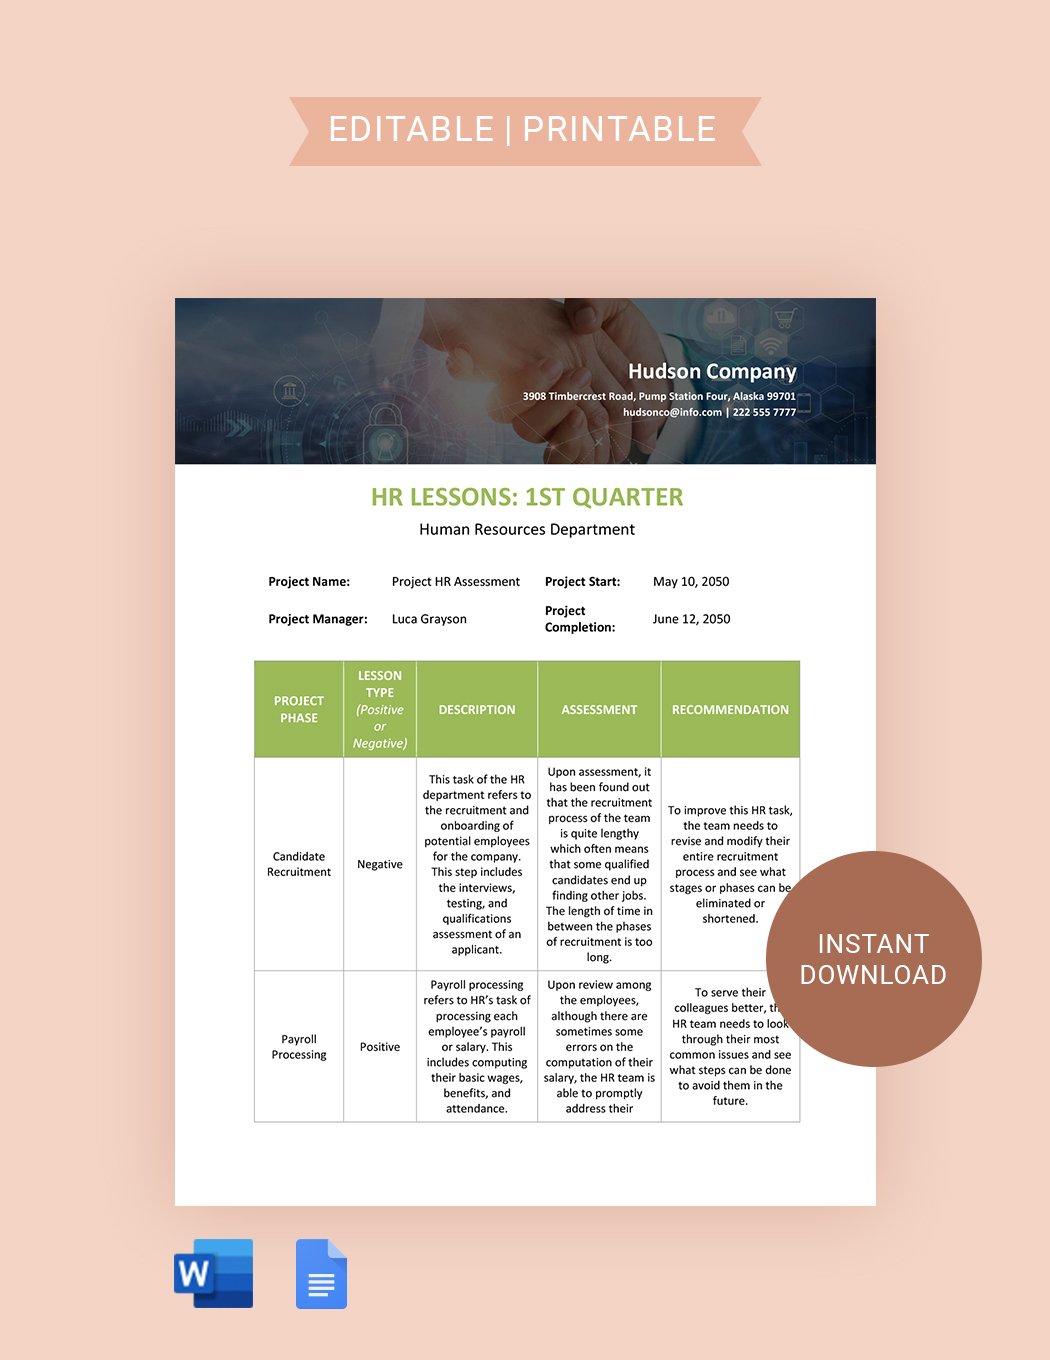 HR Lessons Learned Template